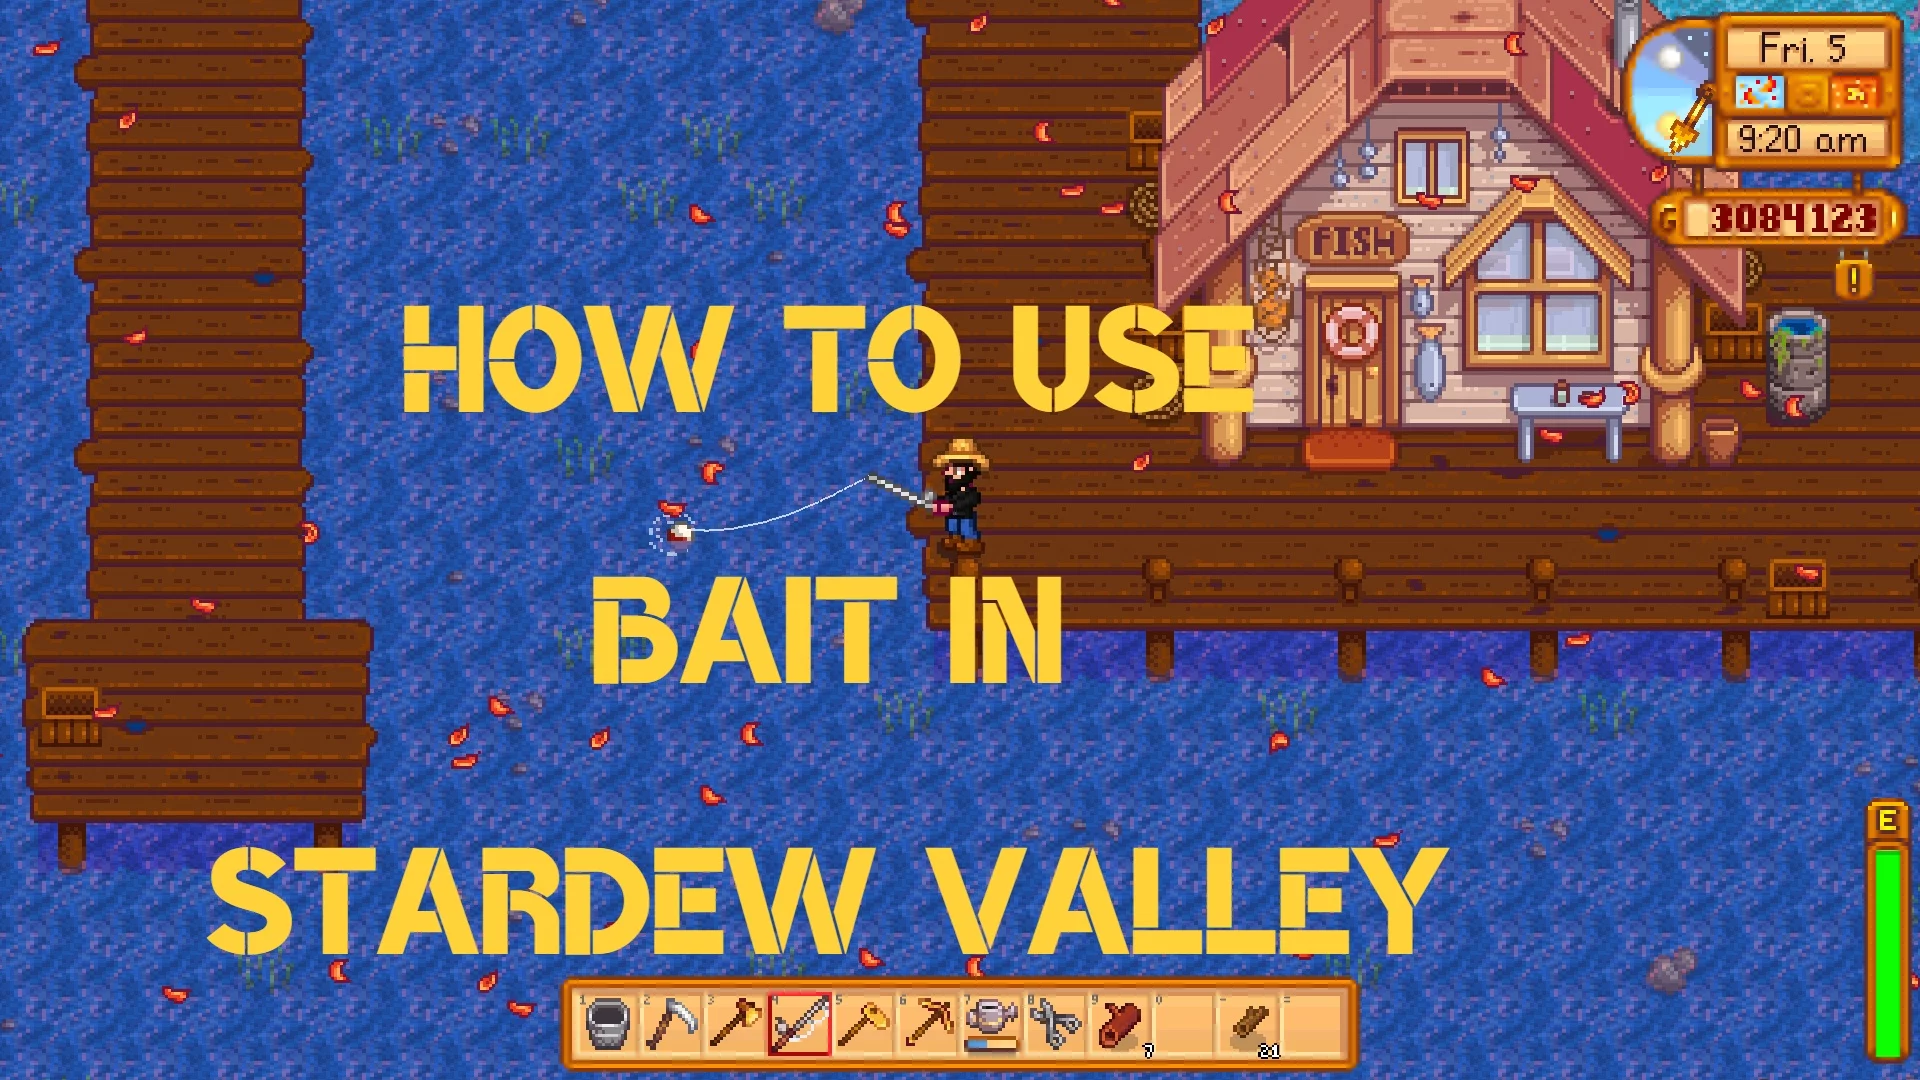 Guide: How To Use Bait In Stardew Valley 